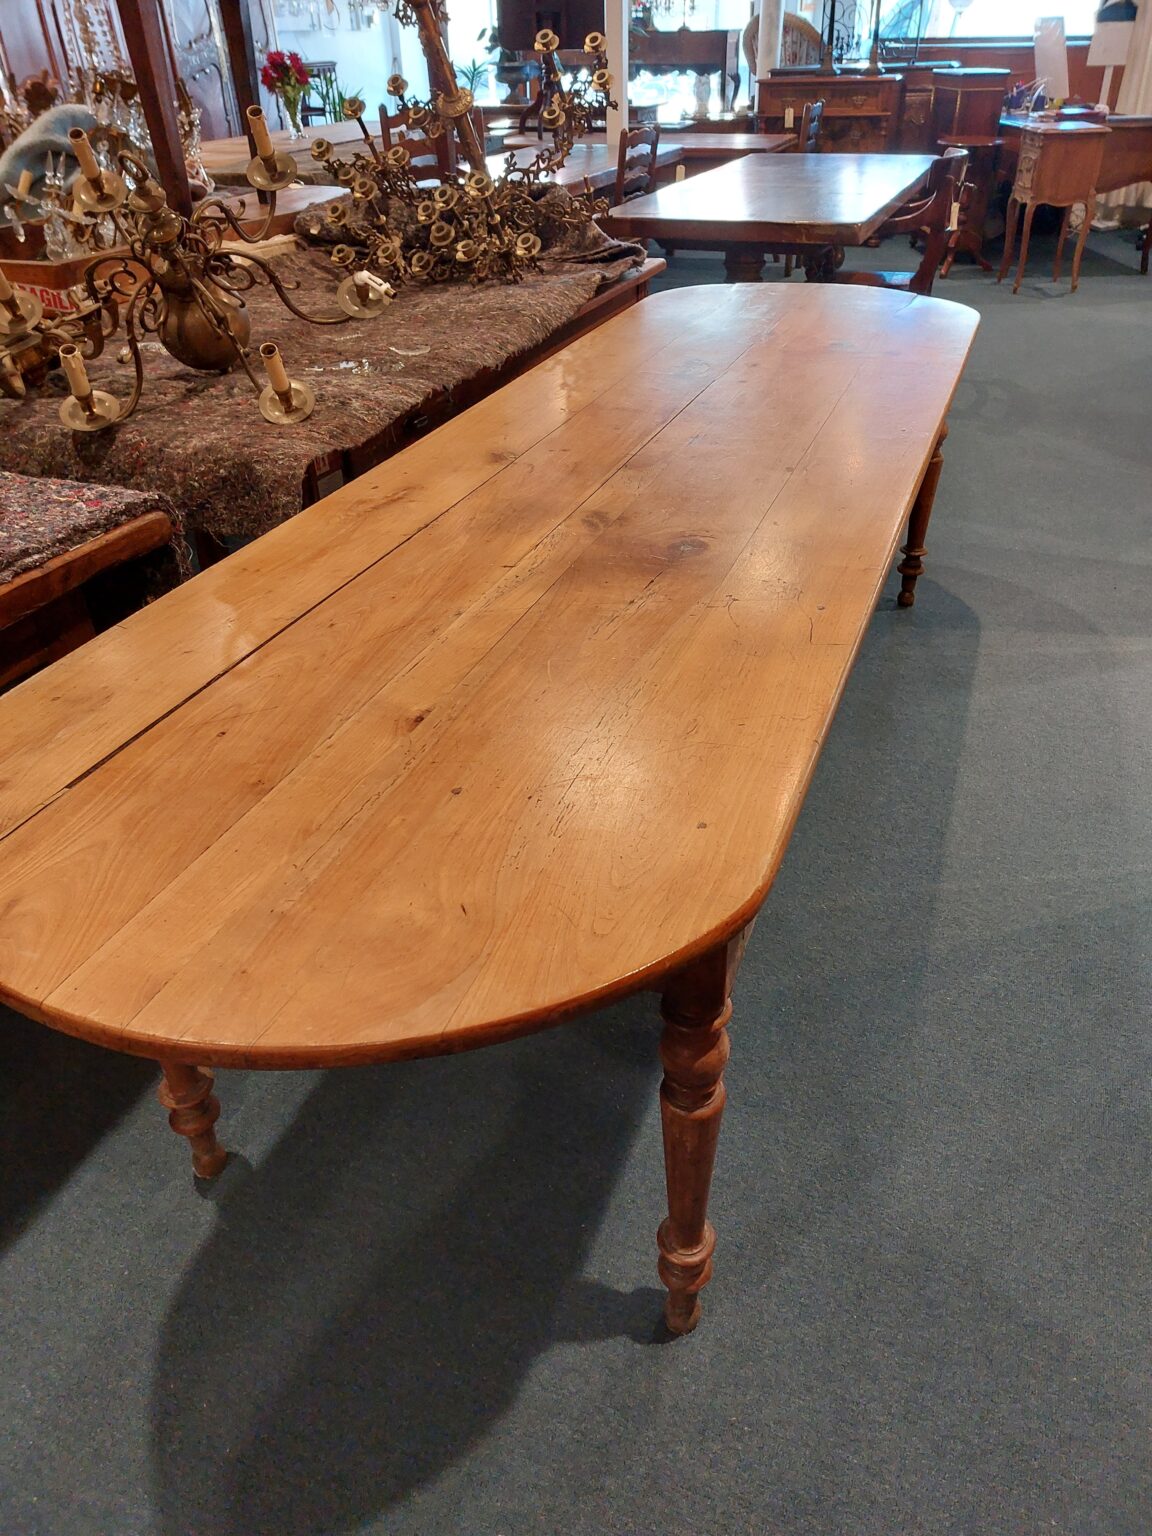 Lovely French Cherrywood round ended table. Turned legs Town and Country Antiques